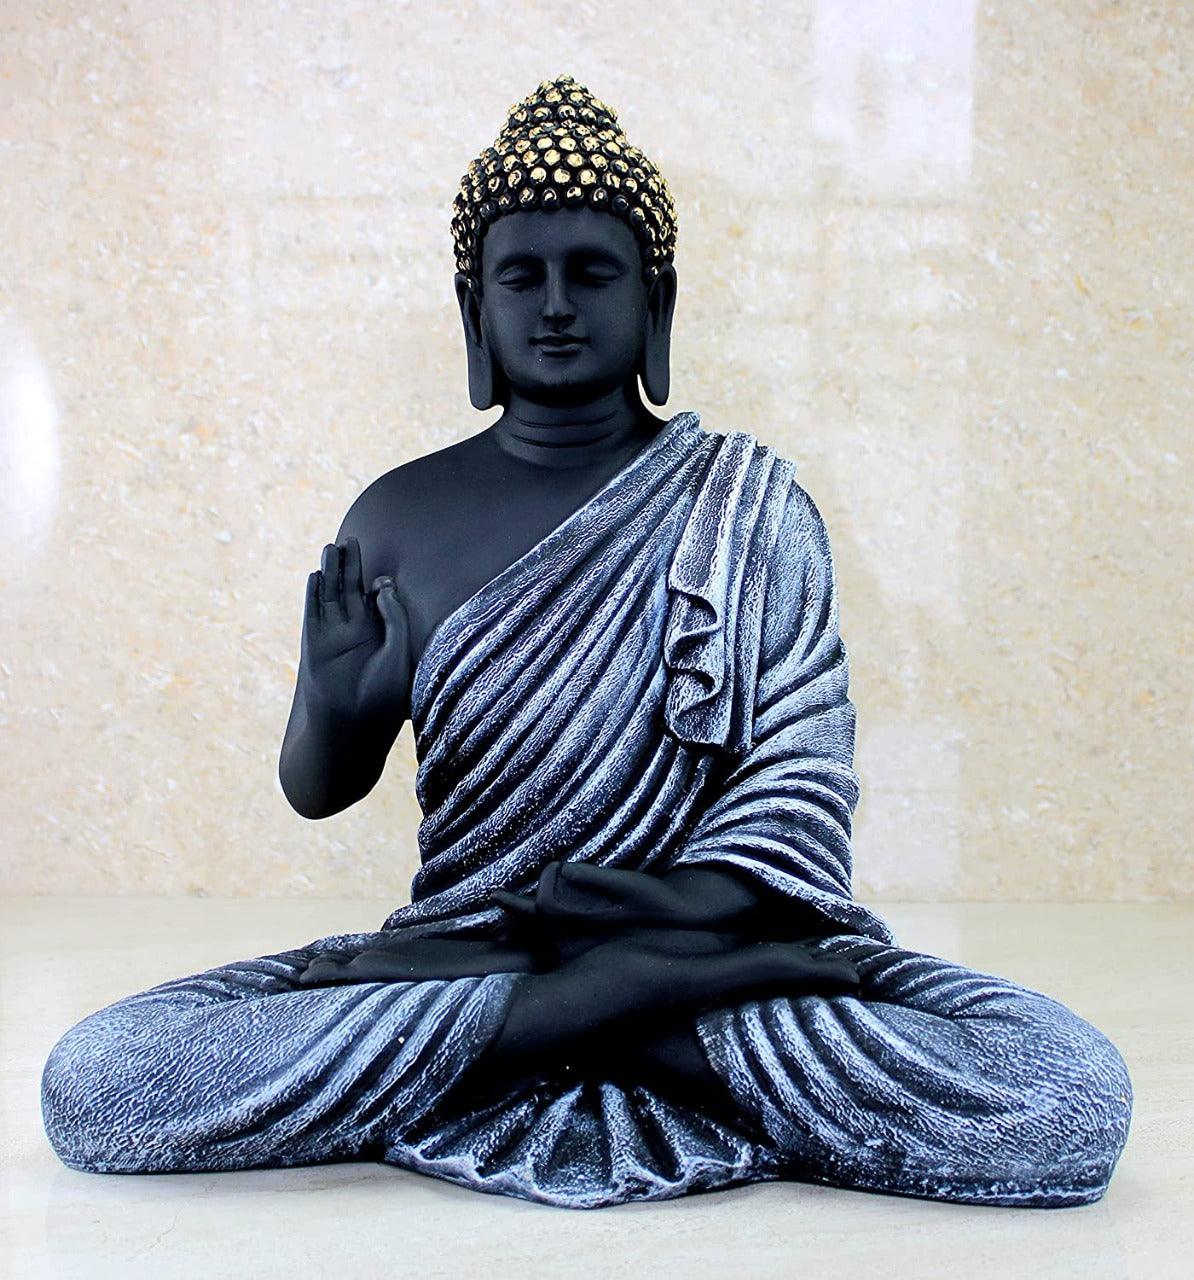 Statue ALiLA Copy of Big Size Meditating Beige Buddha Idol Statue Showpiece for Home Garden Living Room Decor Decoration Gift Gifting Items, 14 inches / 35cm / 1 Feet Statue